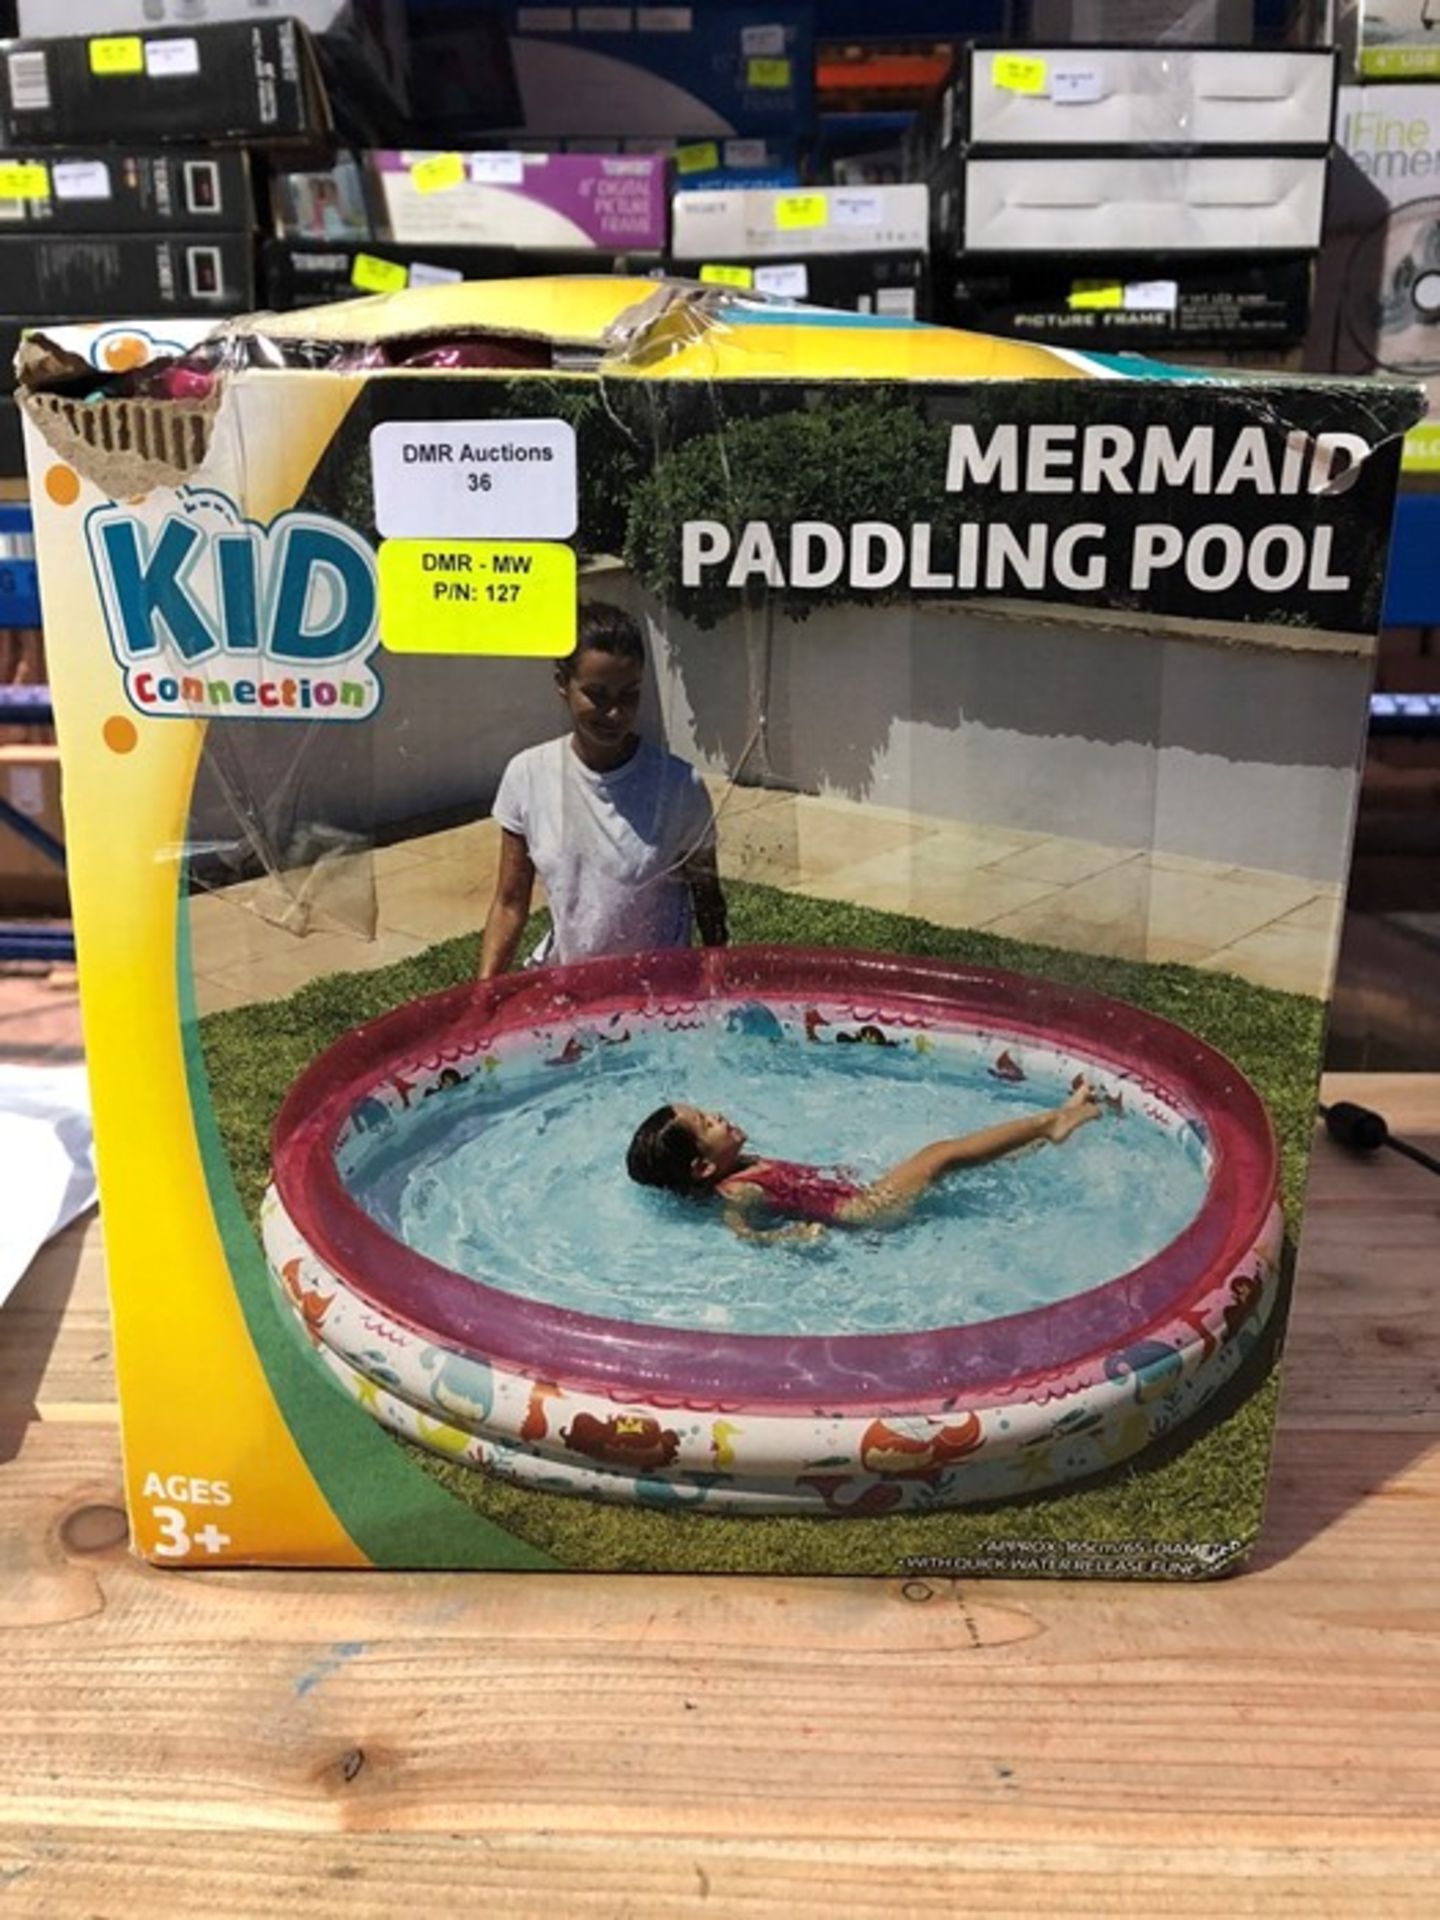 1 BOXED KID CONNECTION MERMAID PADDLING POOL / RRP £12.99 (PUBLIC VIEWING AVAILABLE)